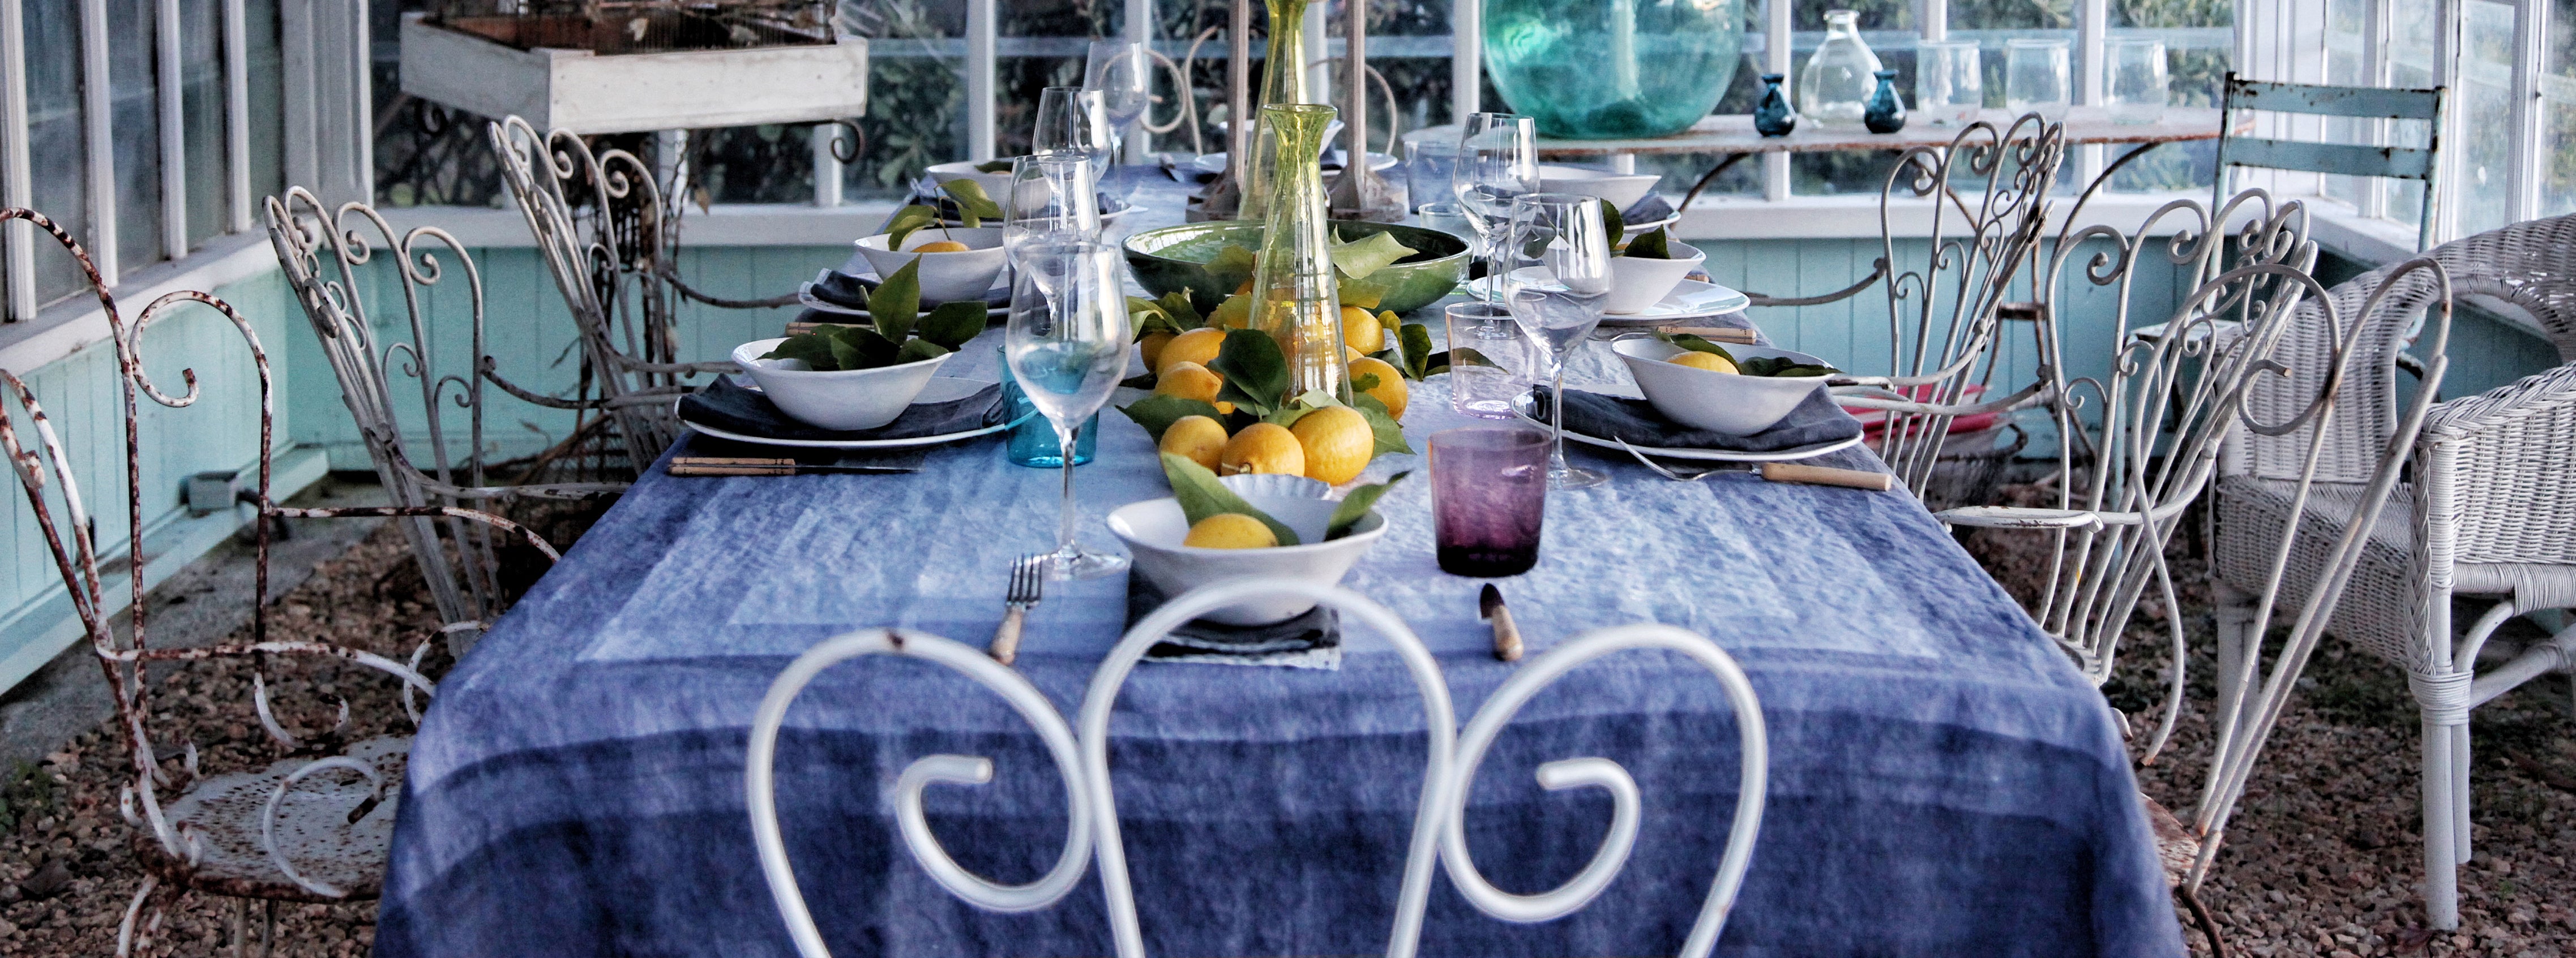 Shades of Blue Tablescape